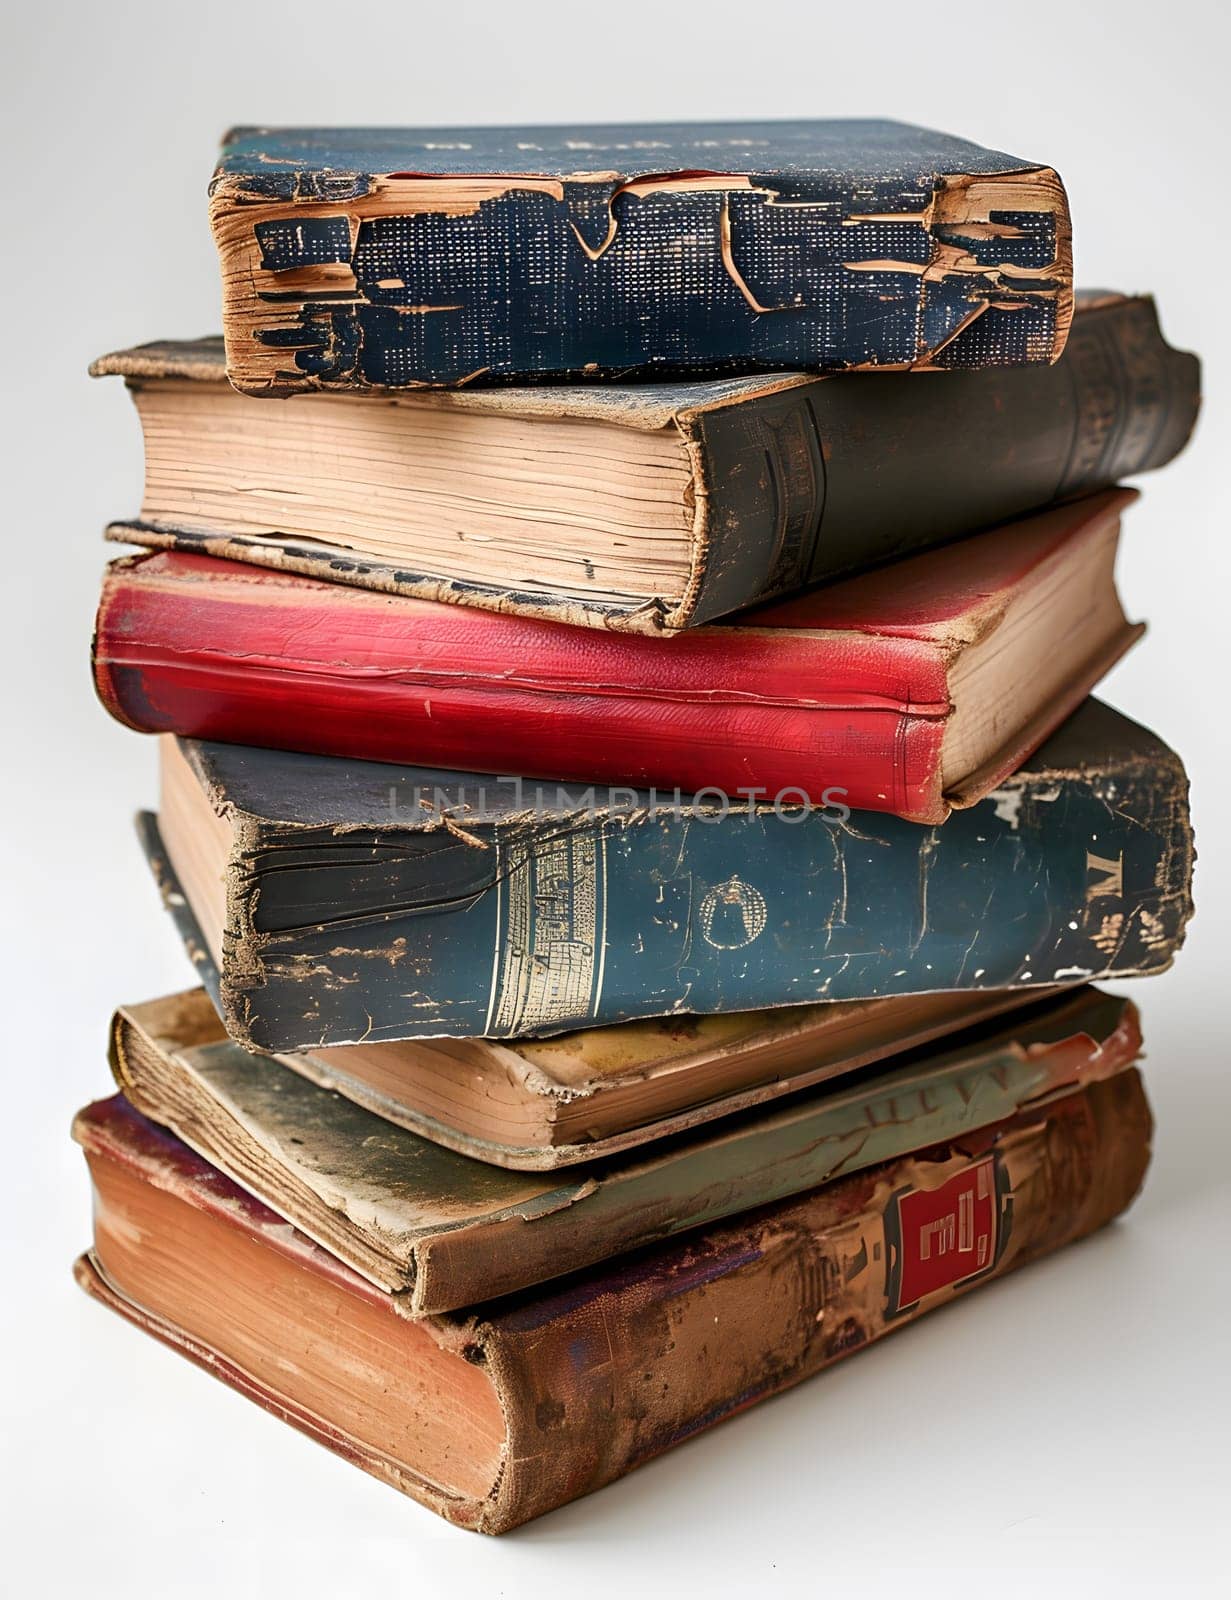 Stack of old books with blue book on top, bound in brown wood cover, linen pages by Nadtochiy